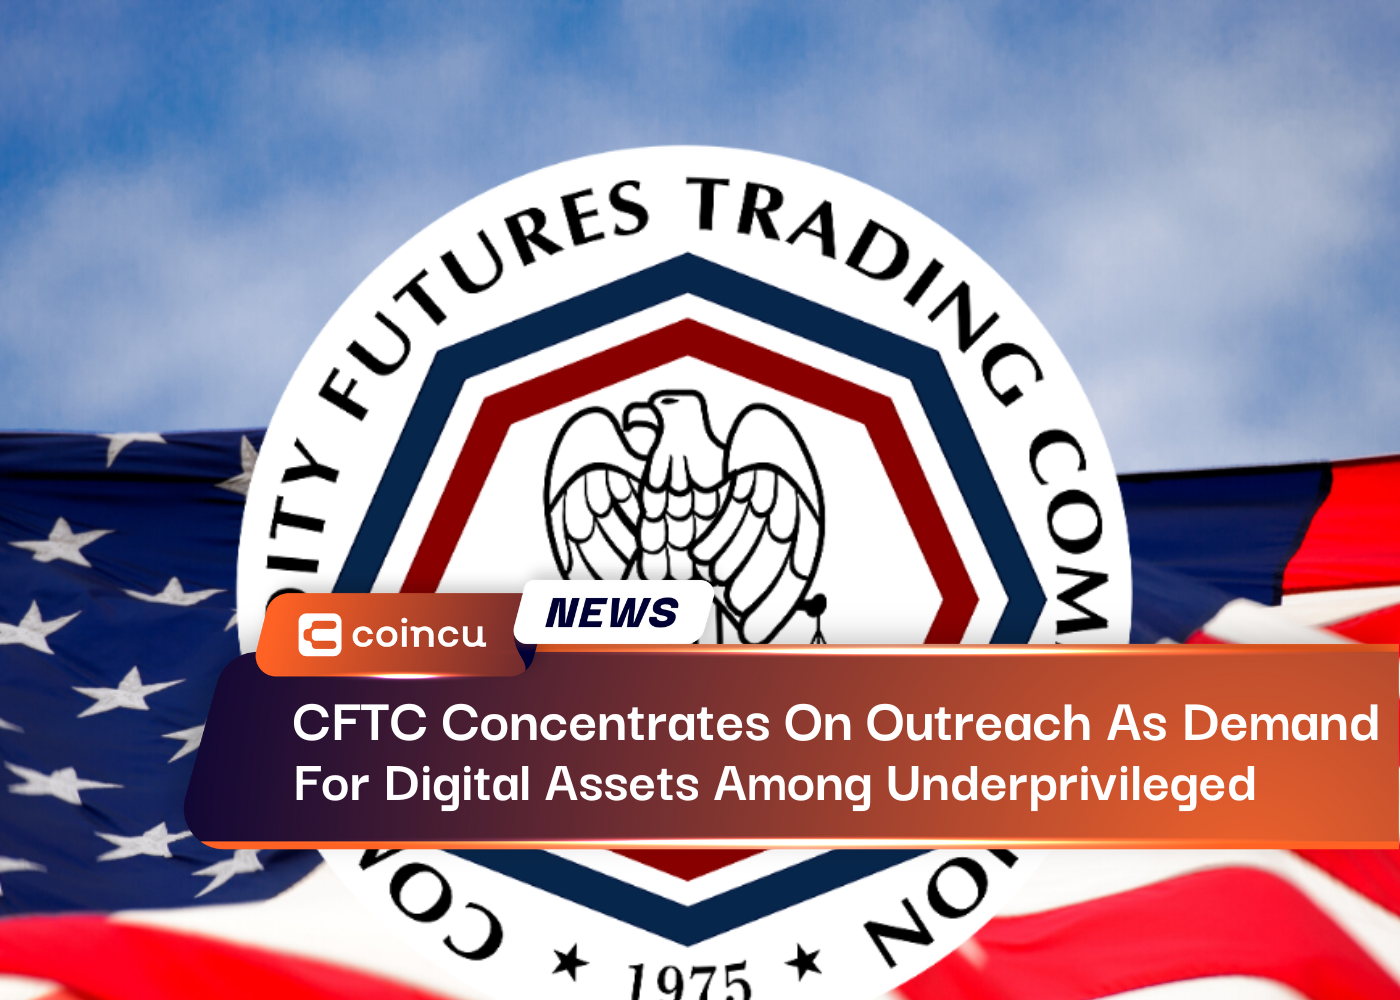 CFTC Concentrates On Outreach As Demand